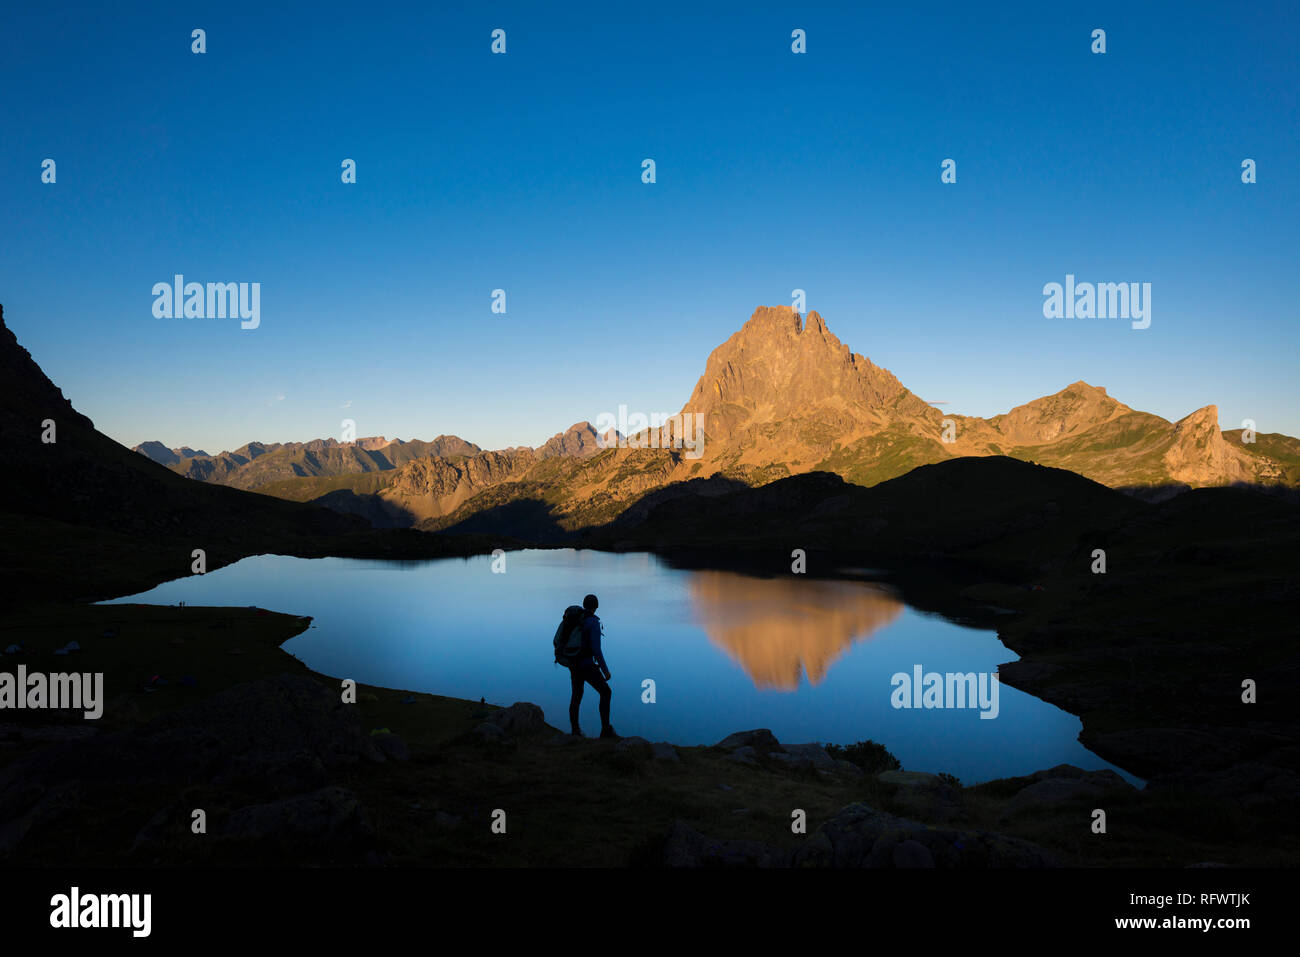 Taking in the view of Midi d'Ossau beyond Lac Gentau beside the GR10 trekking route in the French Pyrenees, Pyrenees Atlantiques, France, Europe Stock Photo